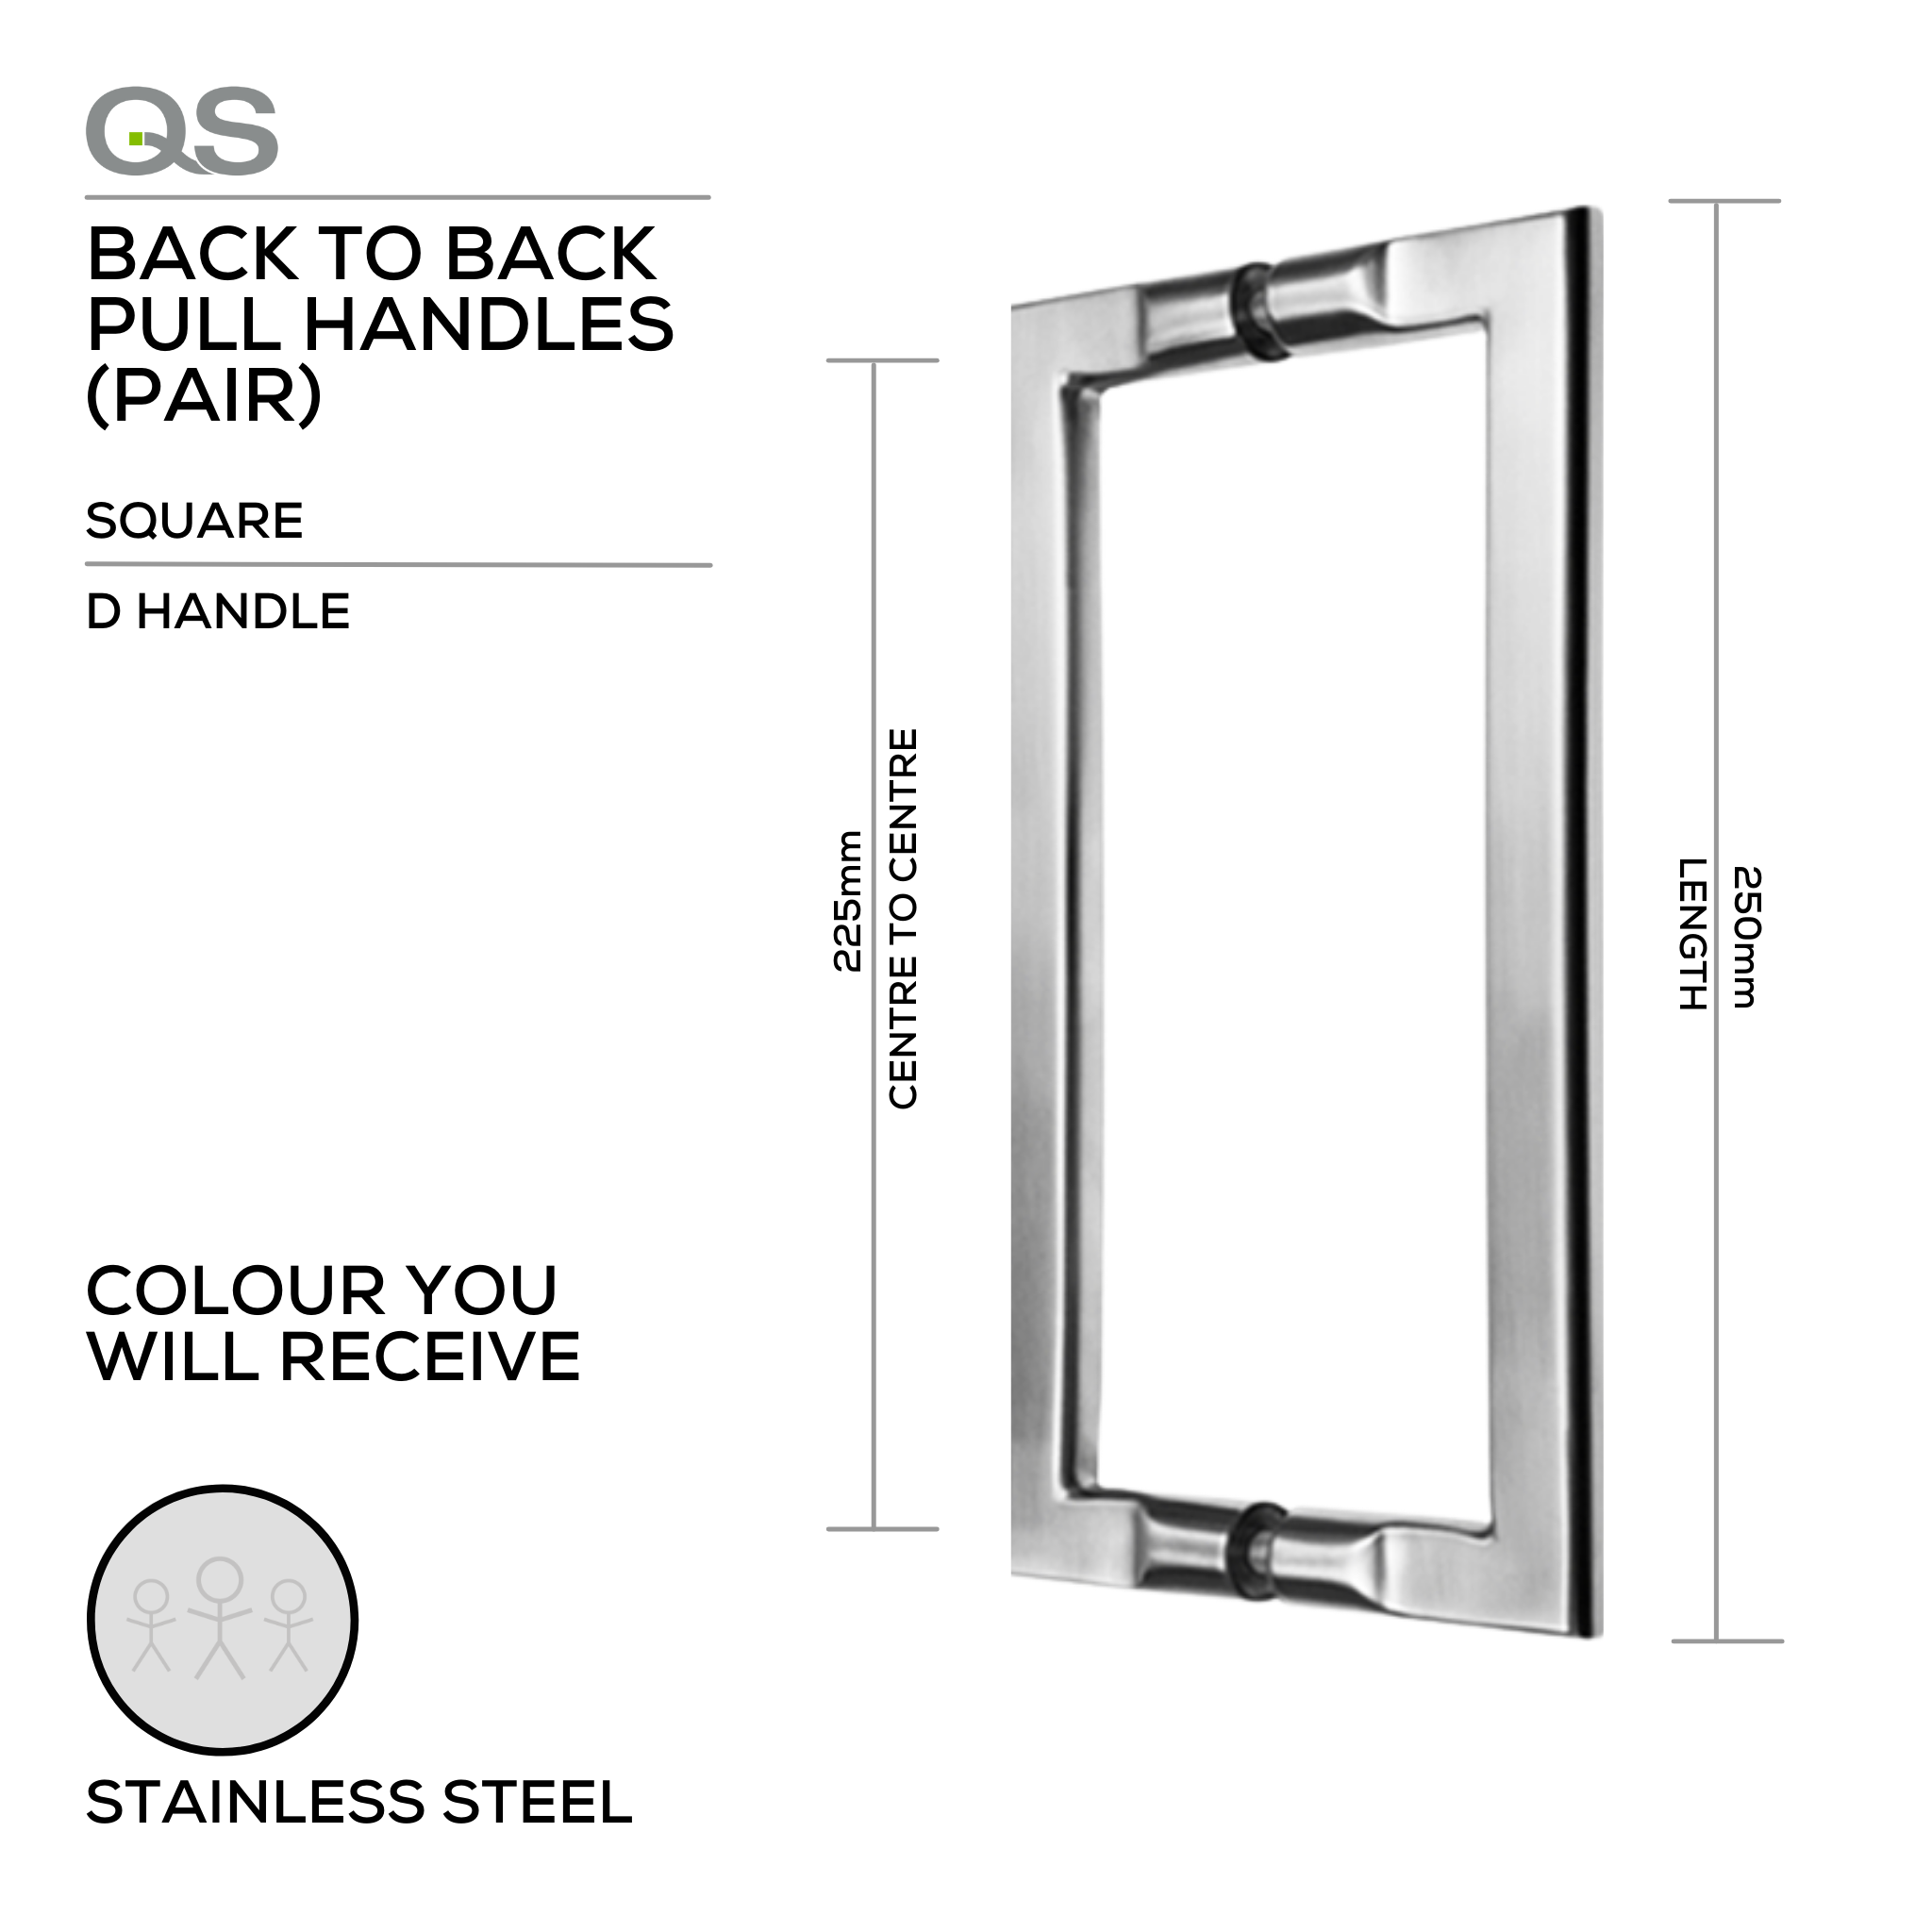 QS2627/P Pello, Pull Handle, Square, D Handle, BTB, 250mm (l) x 225mm (ctc), Stainless Steel, QS